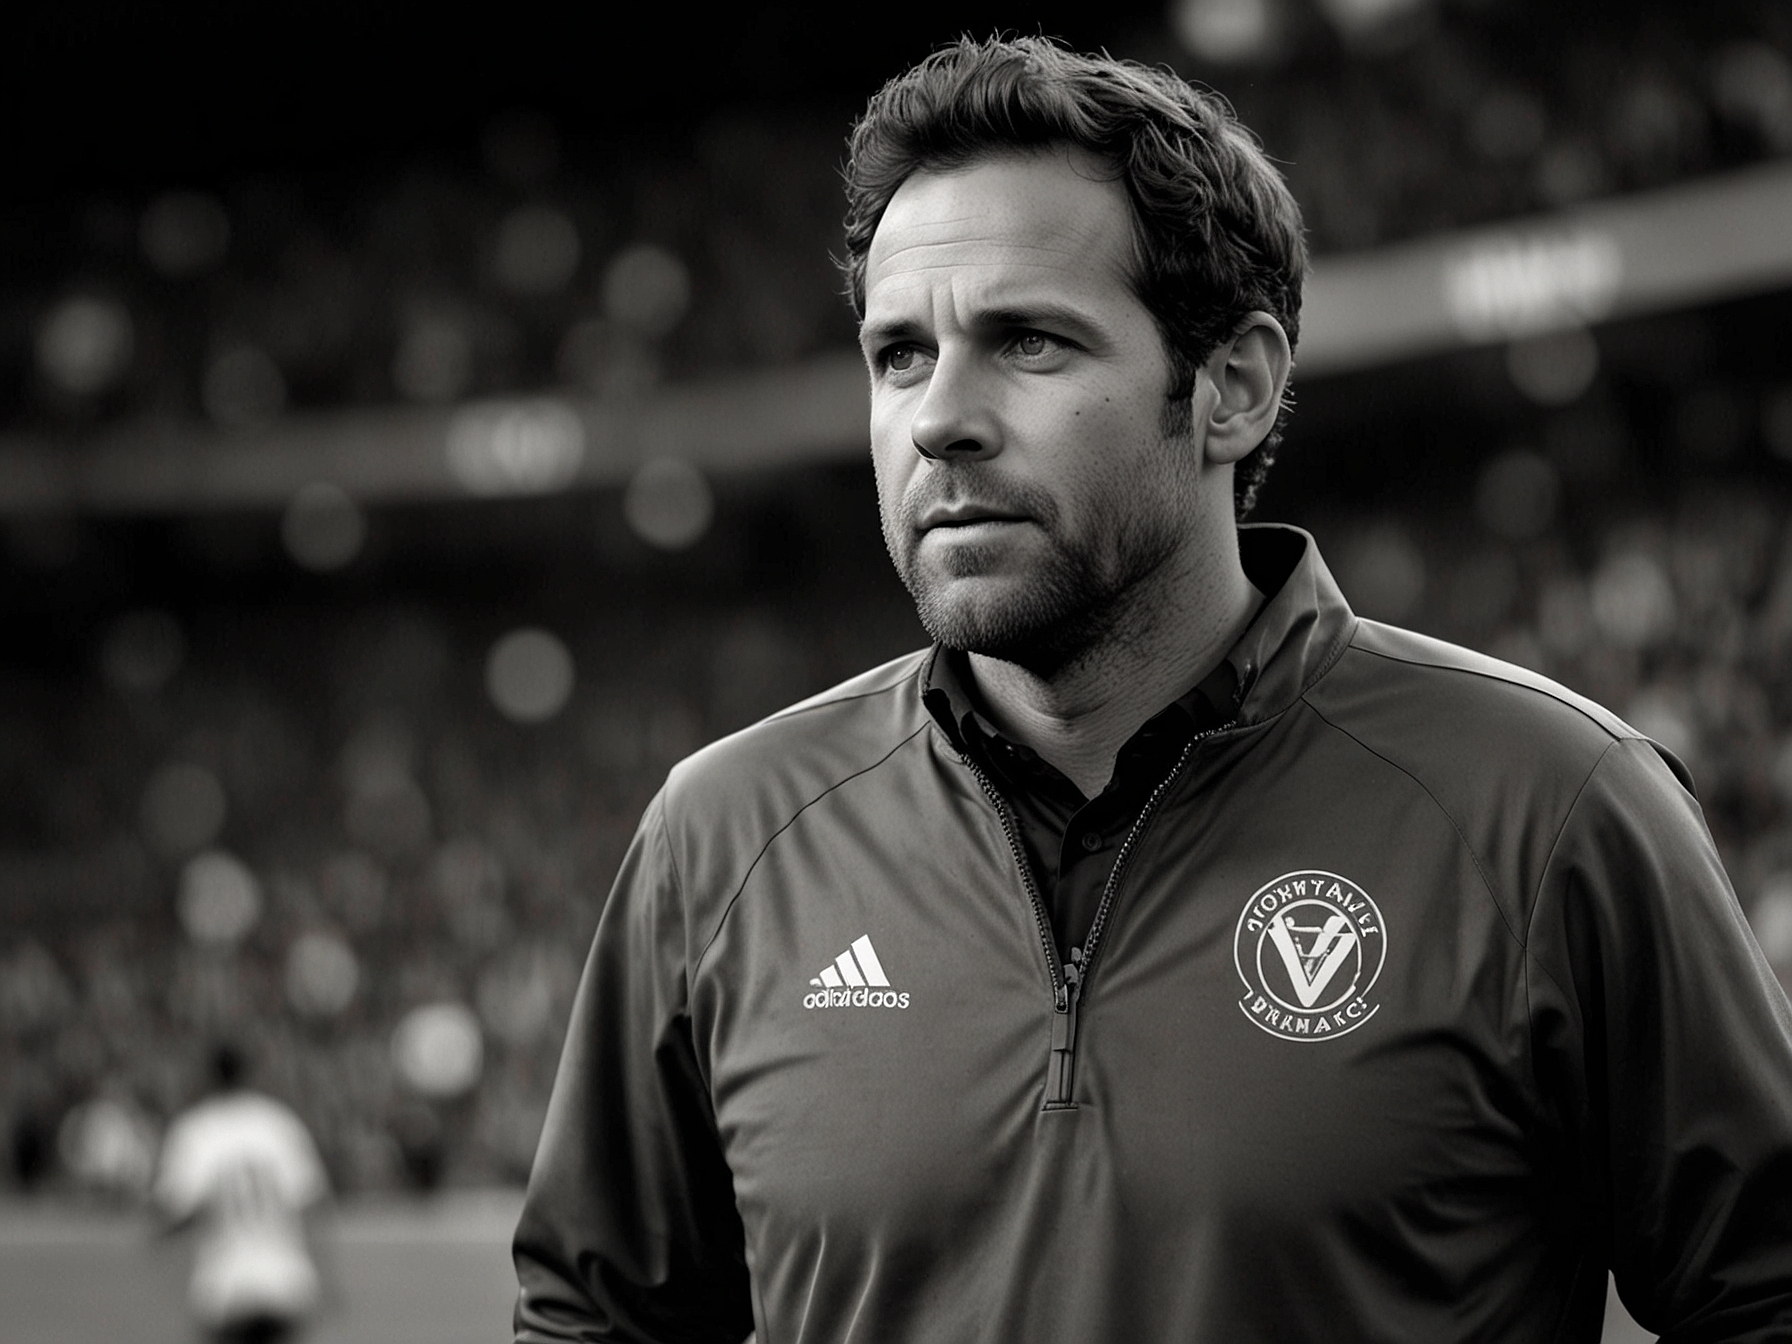 Ben Olsen passionately coaching the Houston Dynamo from the sidelines, illustrating his strategic impact and leadership during the 4-1 victory over D.C. United.